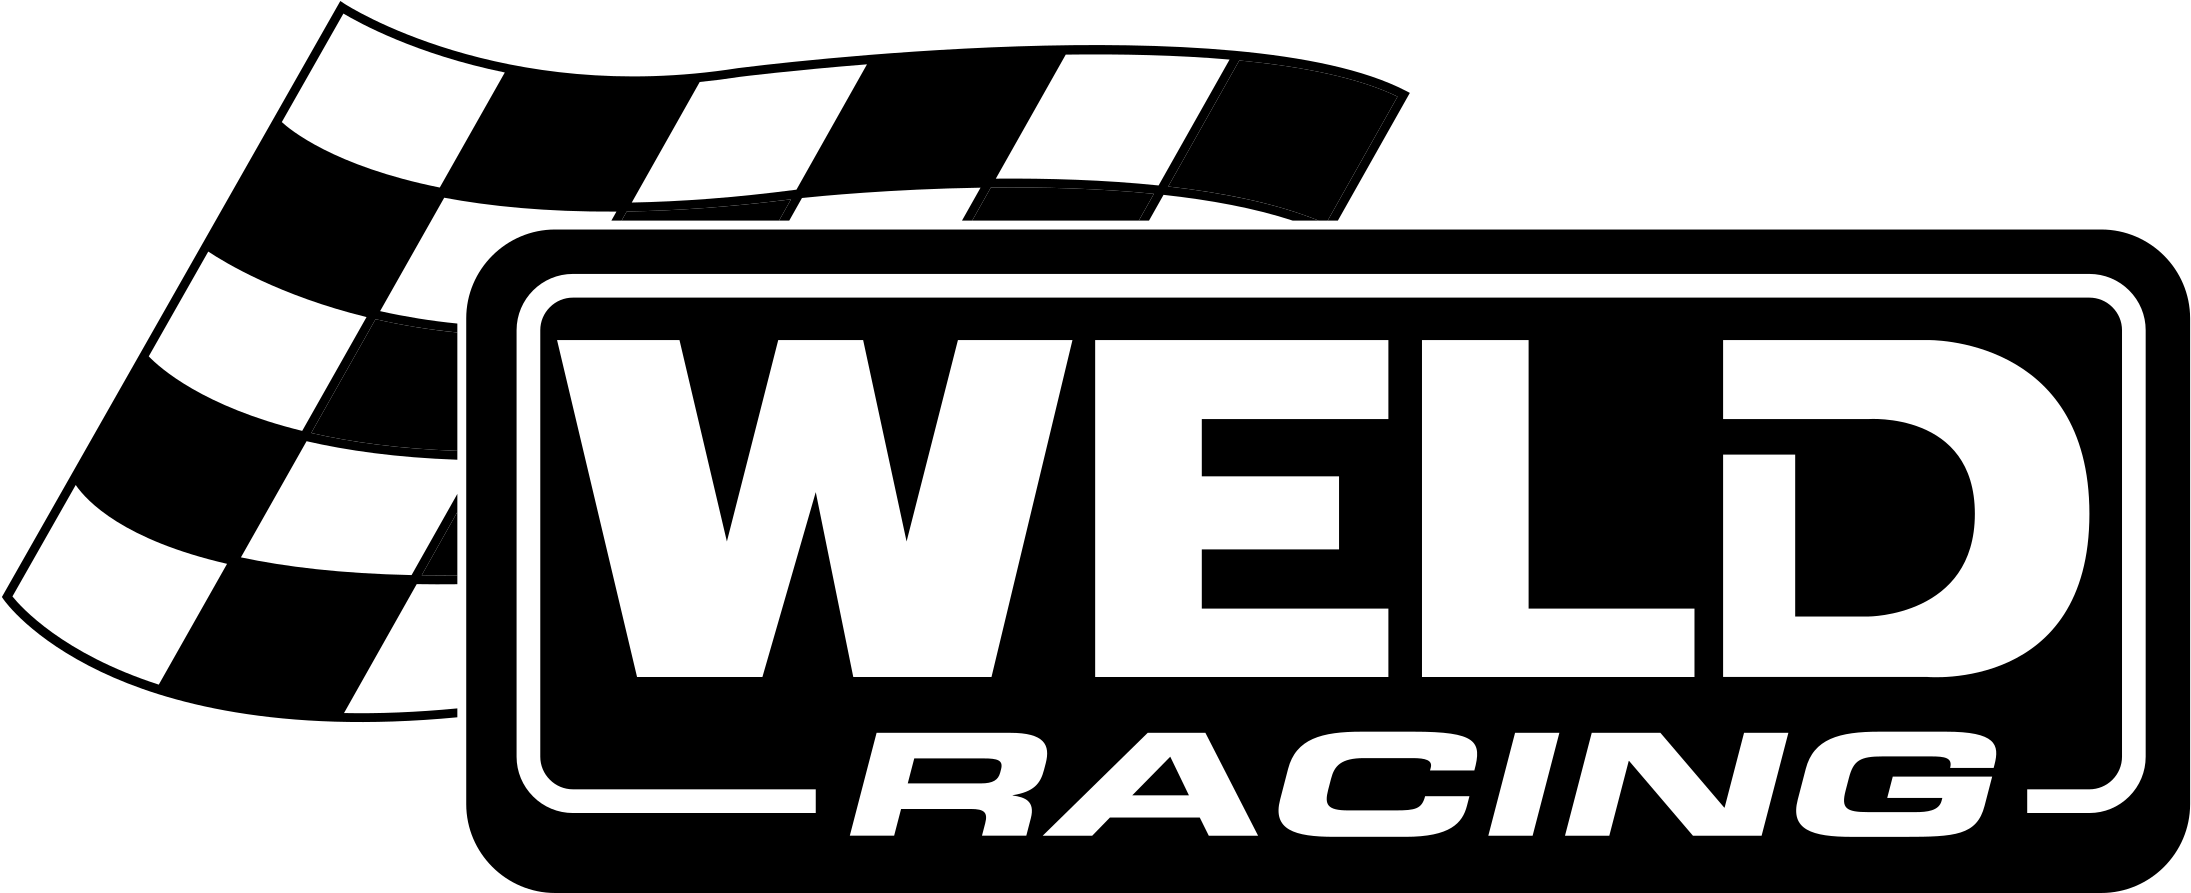 Download Weld Racing Logo Png Transparent Weld Racing Png Image With